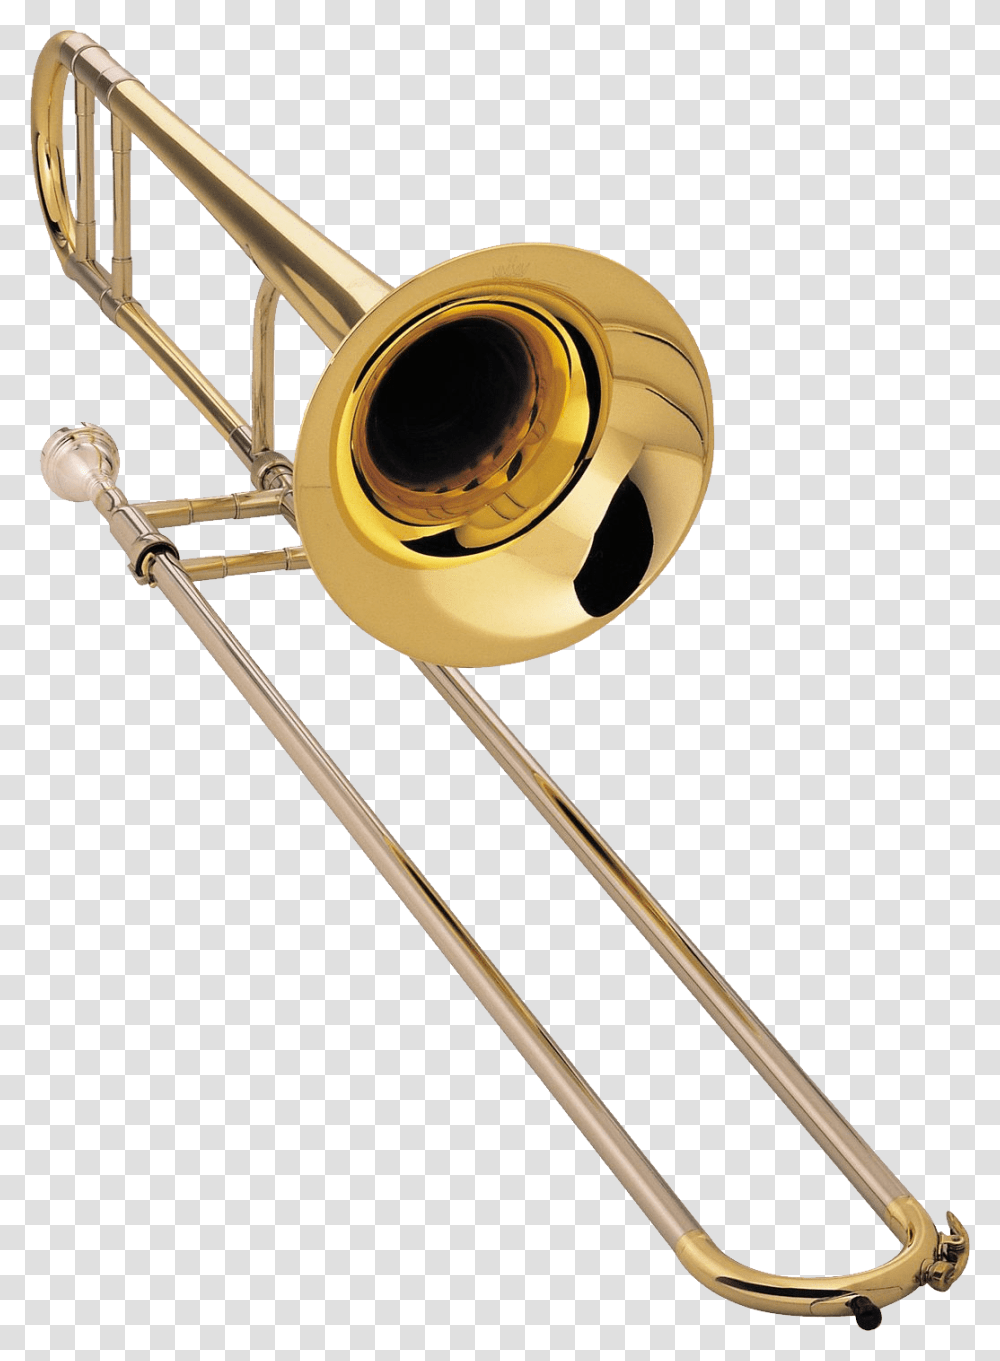 Trombone Instrument With Definition, Brass Section, Musical Instrument, Bow Transparent Png